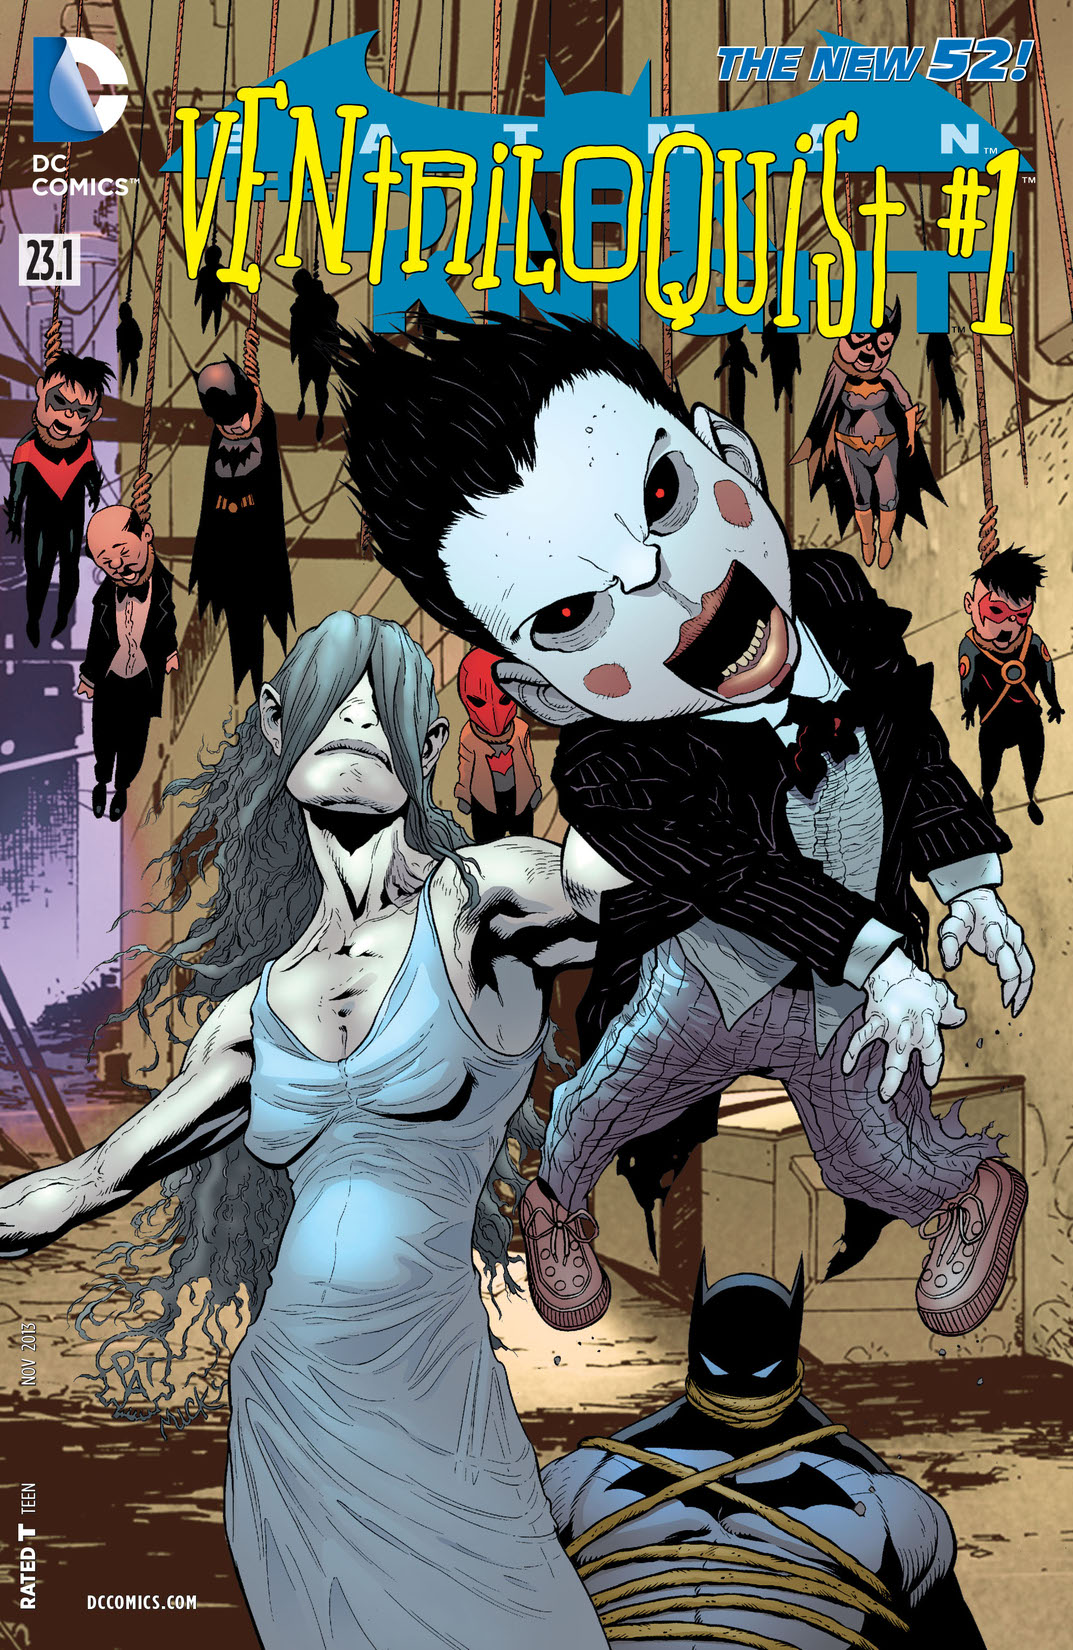 Batman: The Dark Knight feat Ventriloquist (2013-) #23.1 preview images